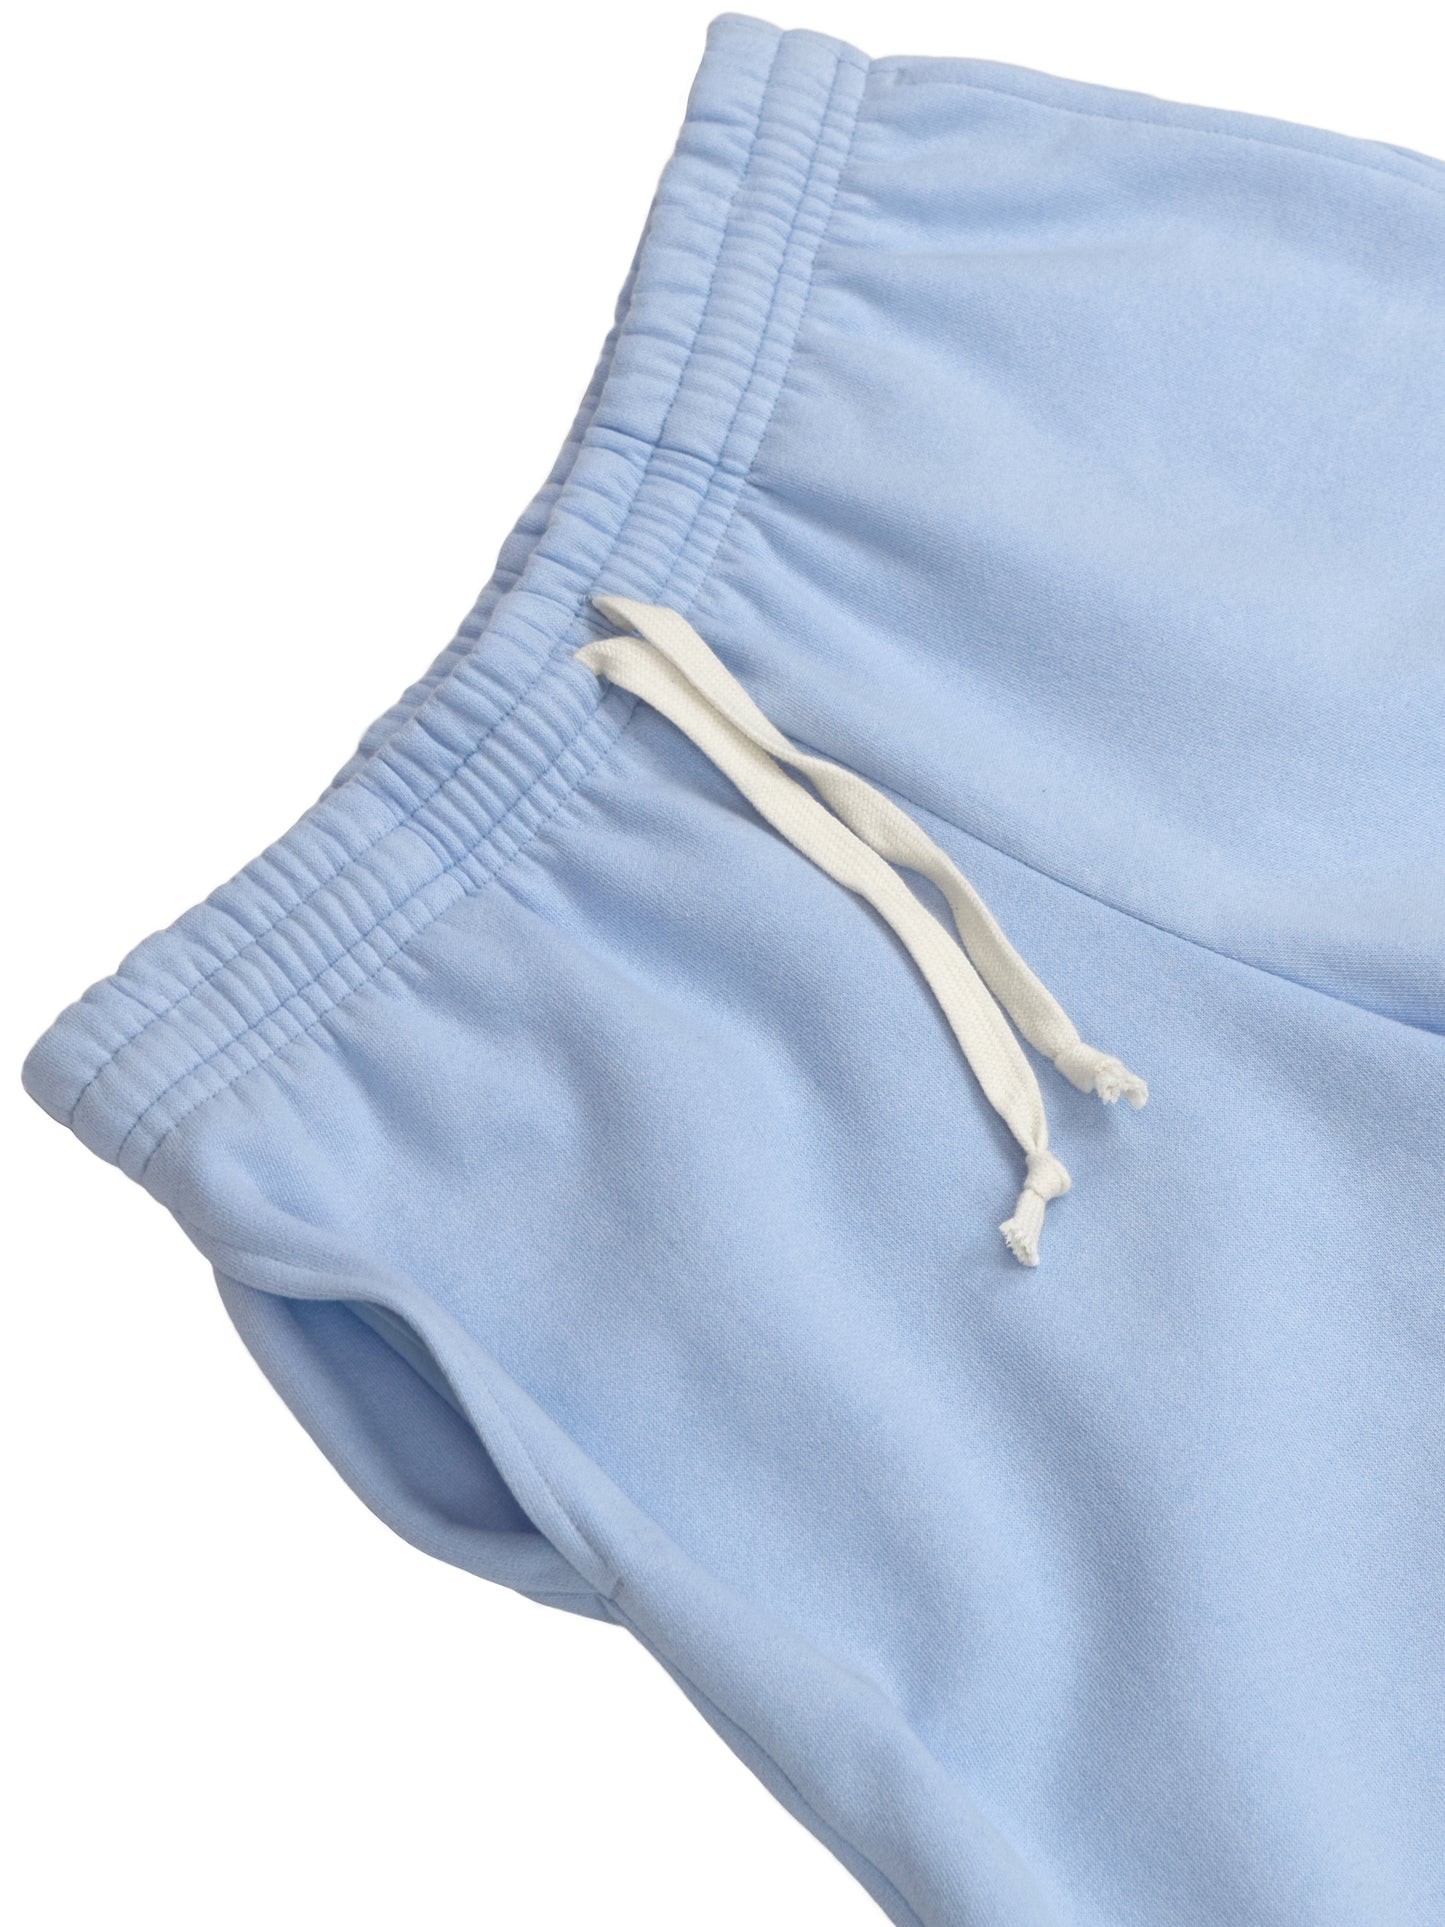 Close up of airy blue longshorts, showing texture of cotton fabric.